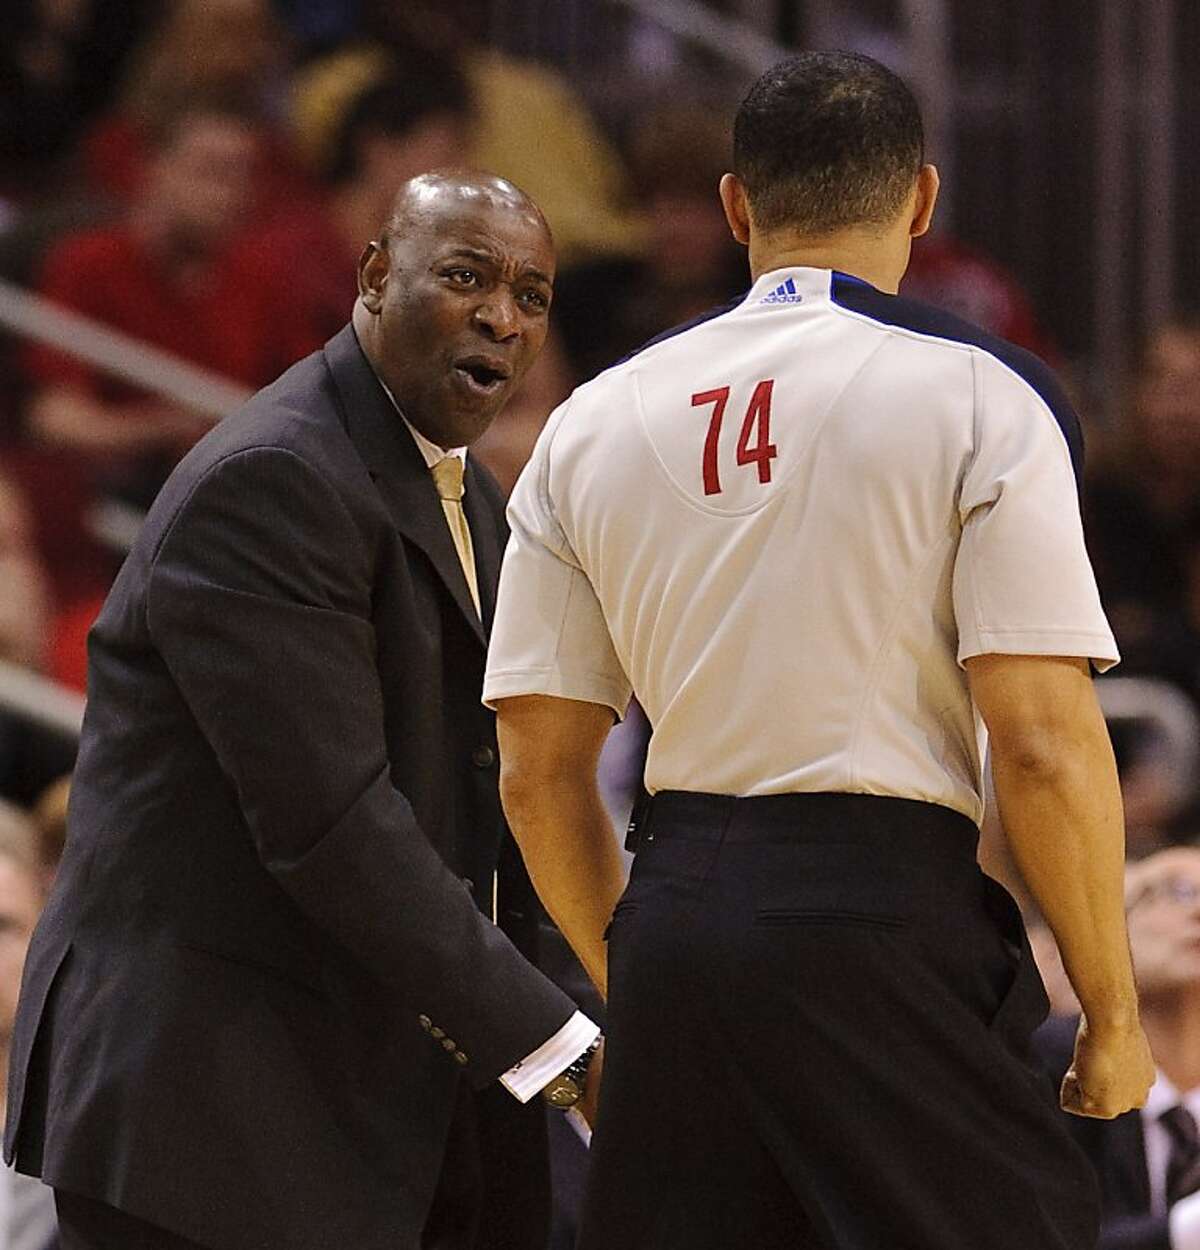 Golden State Warriors head coach Keith Smart, left, disputes a call with referee Curtis Blair (74) during the third quarter of an NBA basketball game against the Houston Rockets, Wednesday, March 23, 2011, in Houston. The Rockets beat the Warriors 131-112.